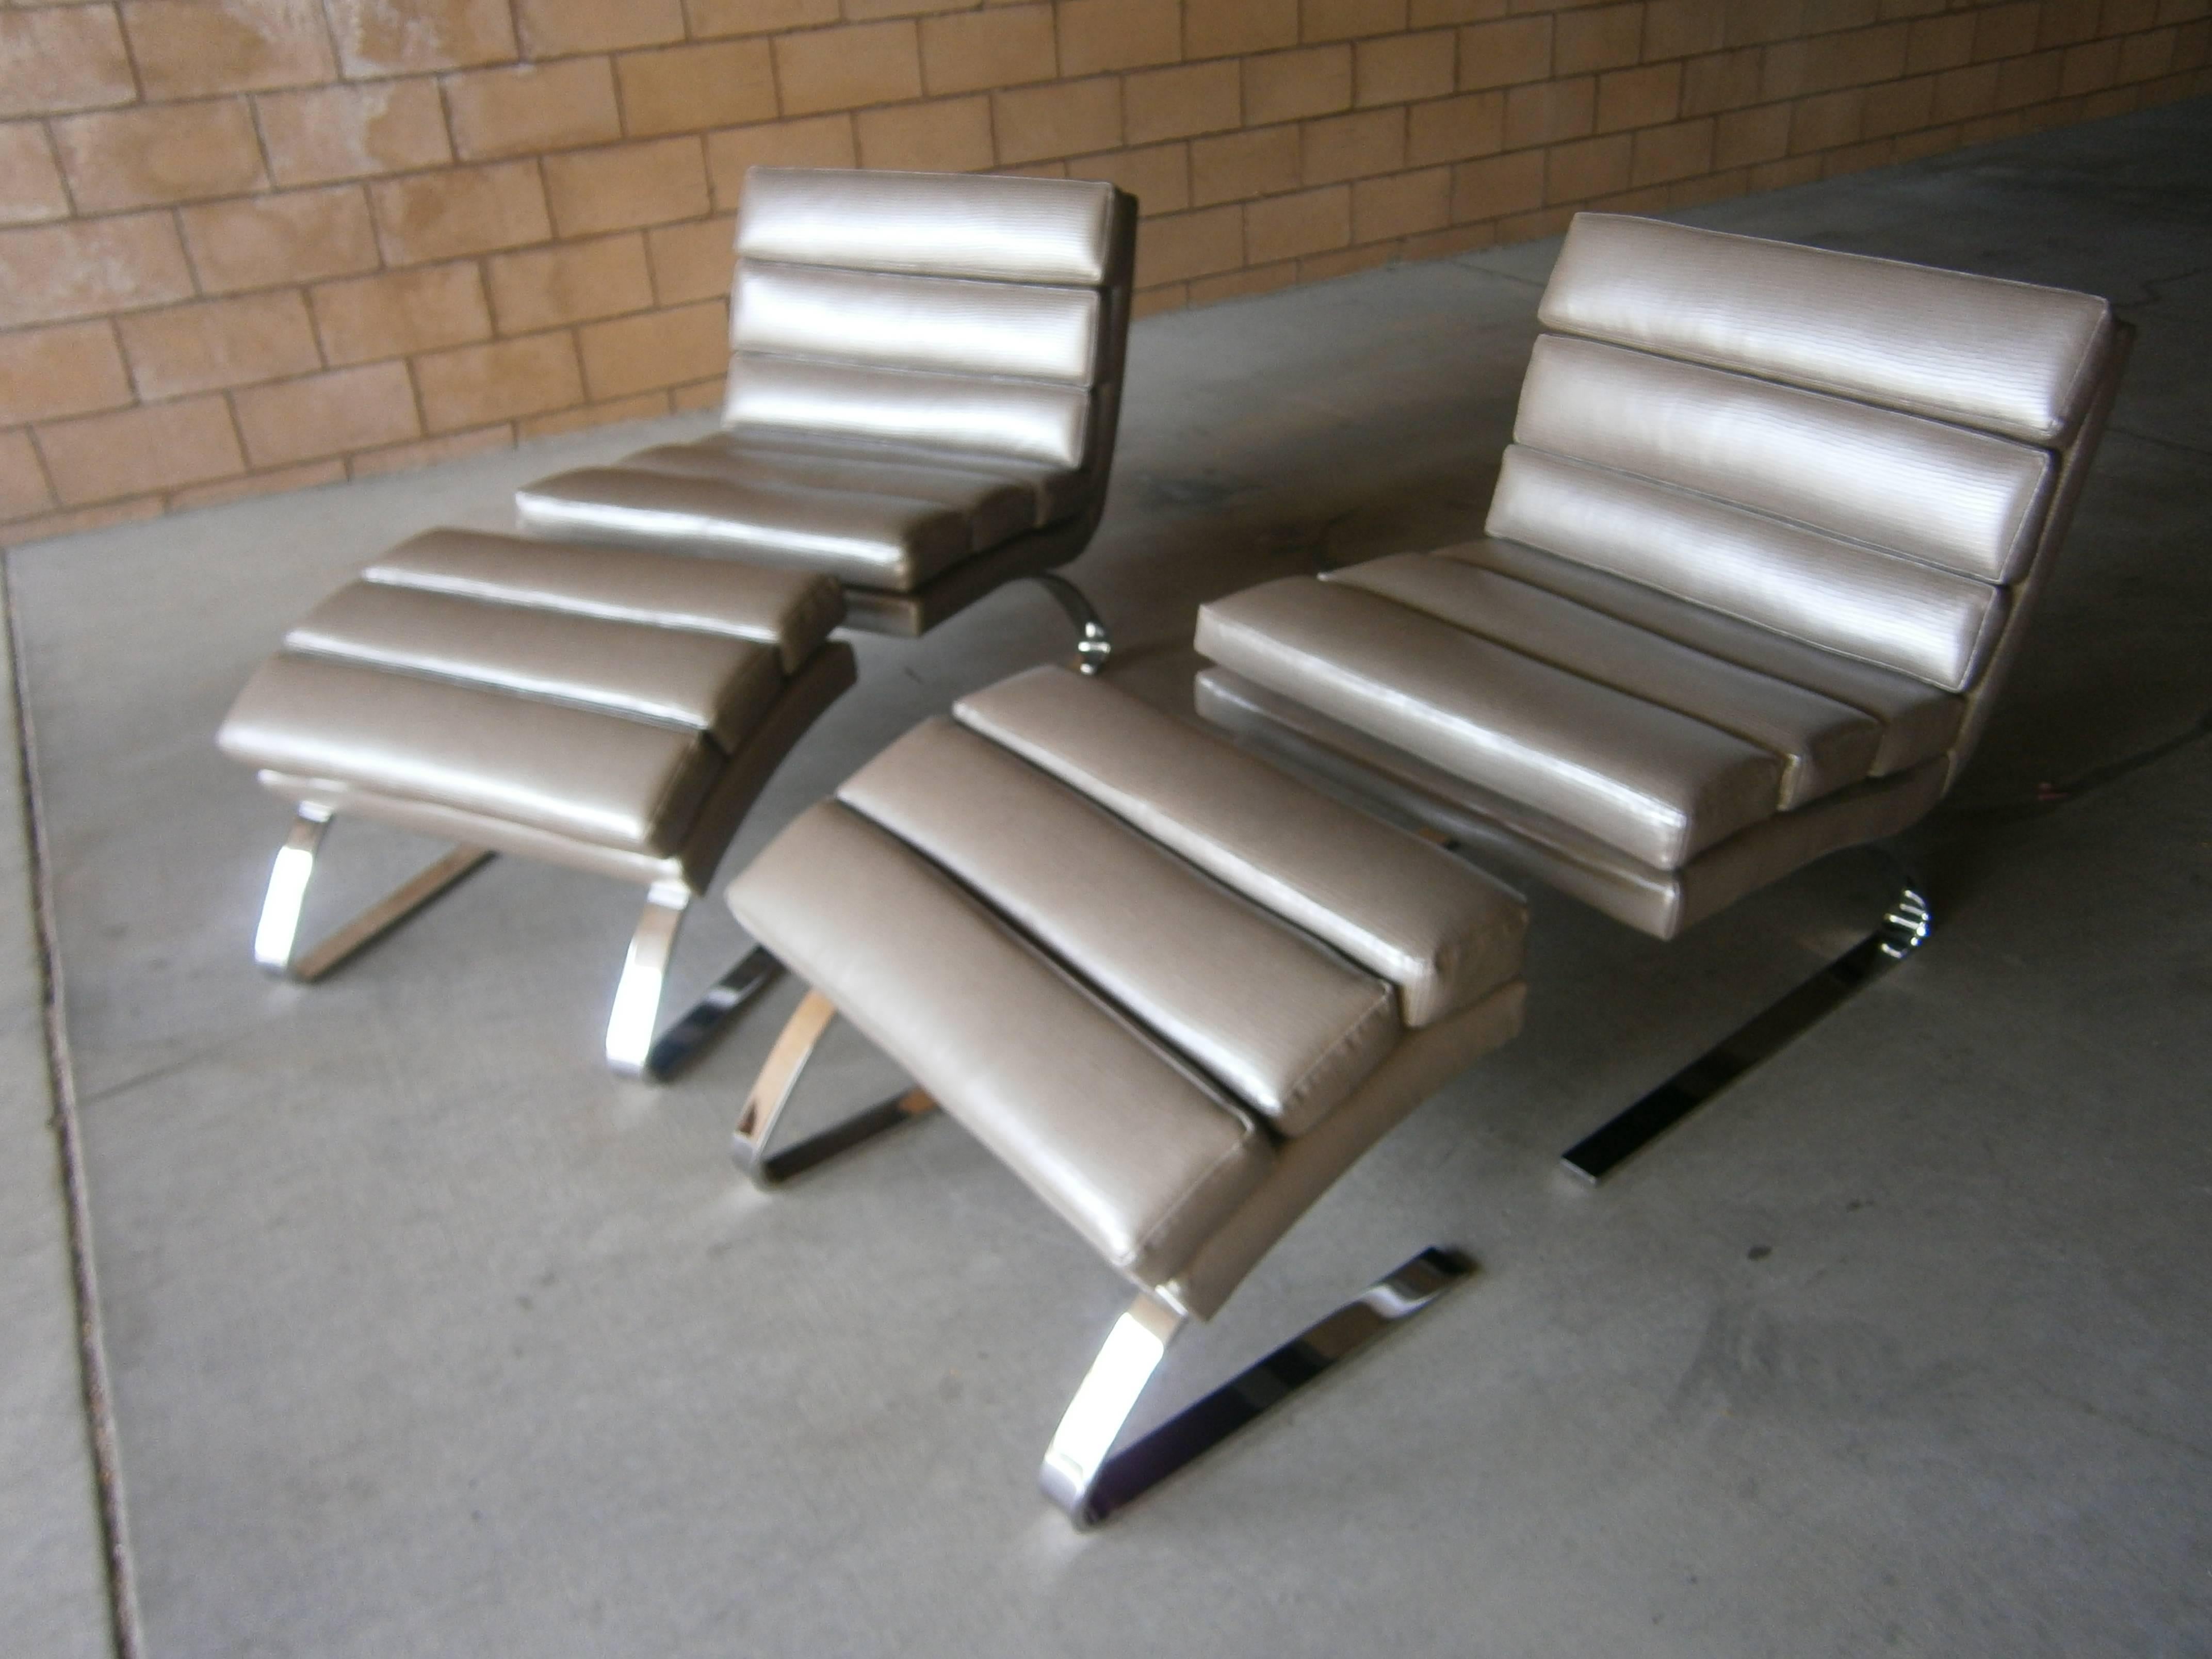 A vintage cantilevered lounge chair and ottoman with chrome-plated solid flat bar steel legs from the 1990s. All pieces have been newly reupholstered using a snakeskin patterned high quality vinyl. Because of the nature of the cantilevered design,